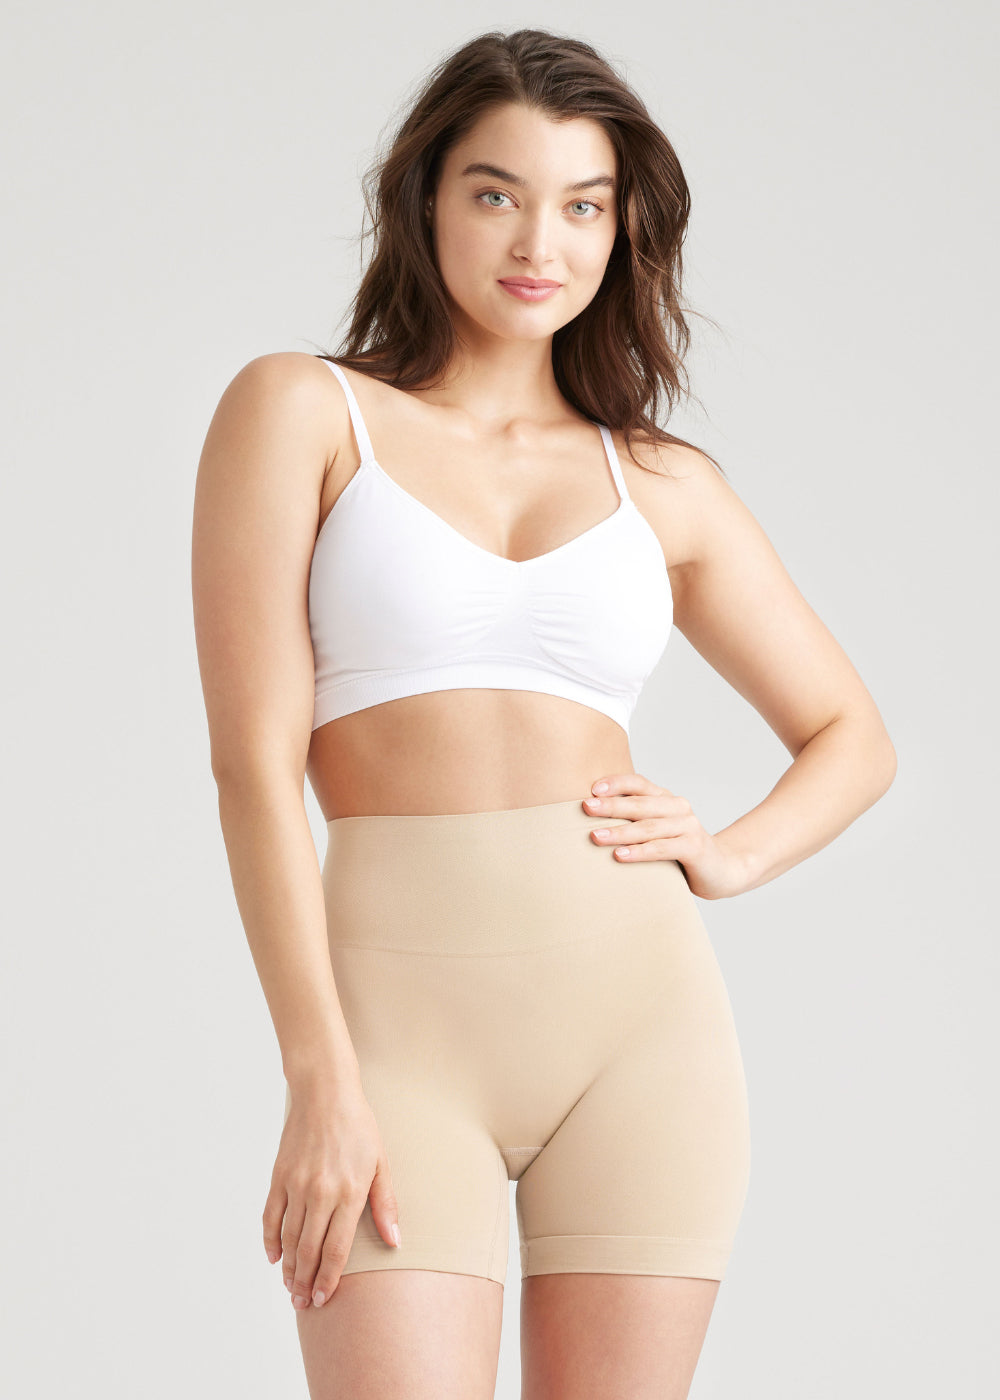 Yummie Ultralite Seamless Smoothing Shortie, Frappe, Size M/L, from Soma